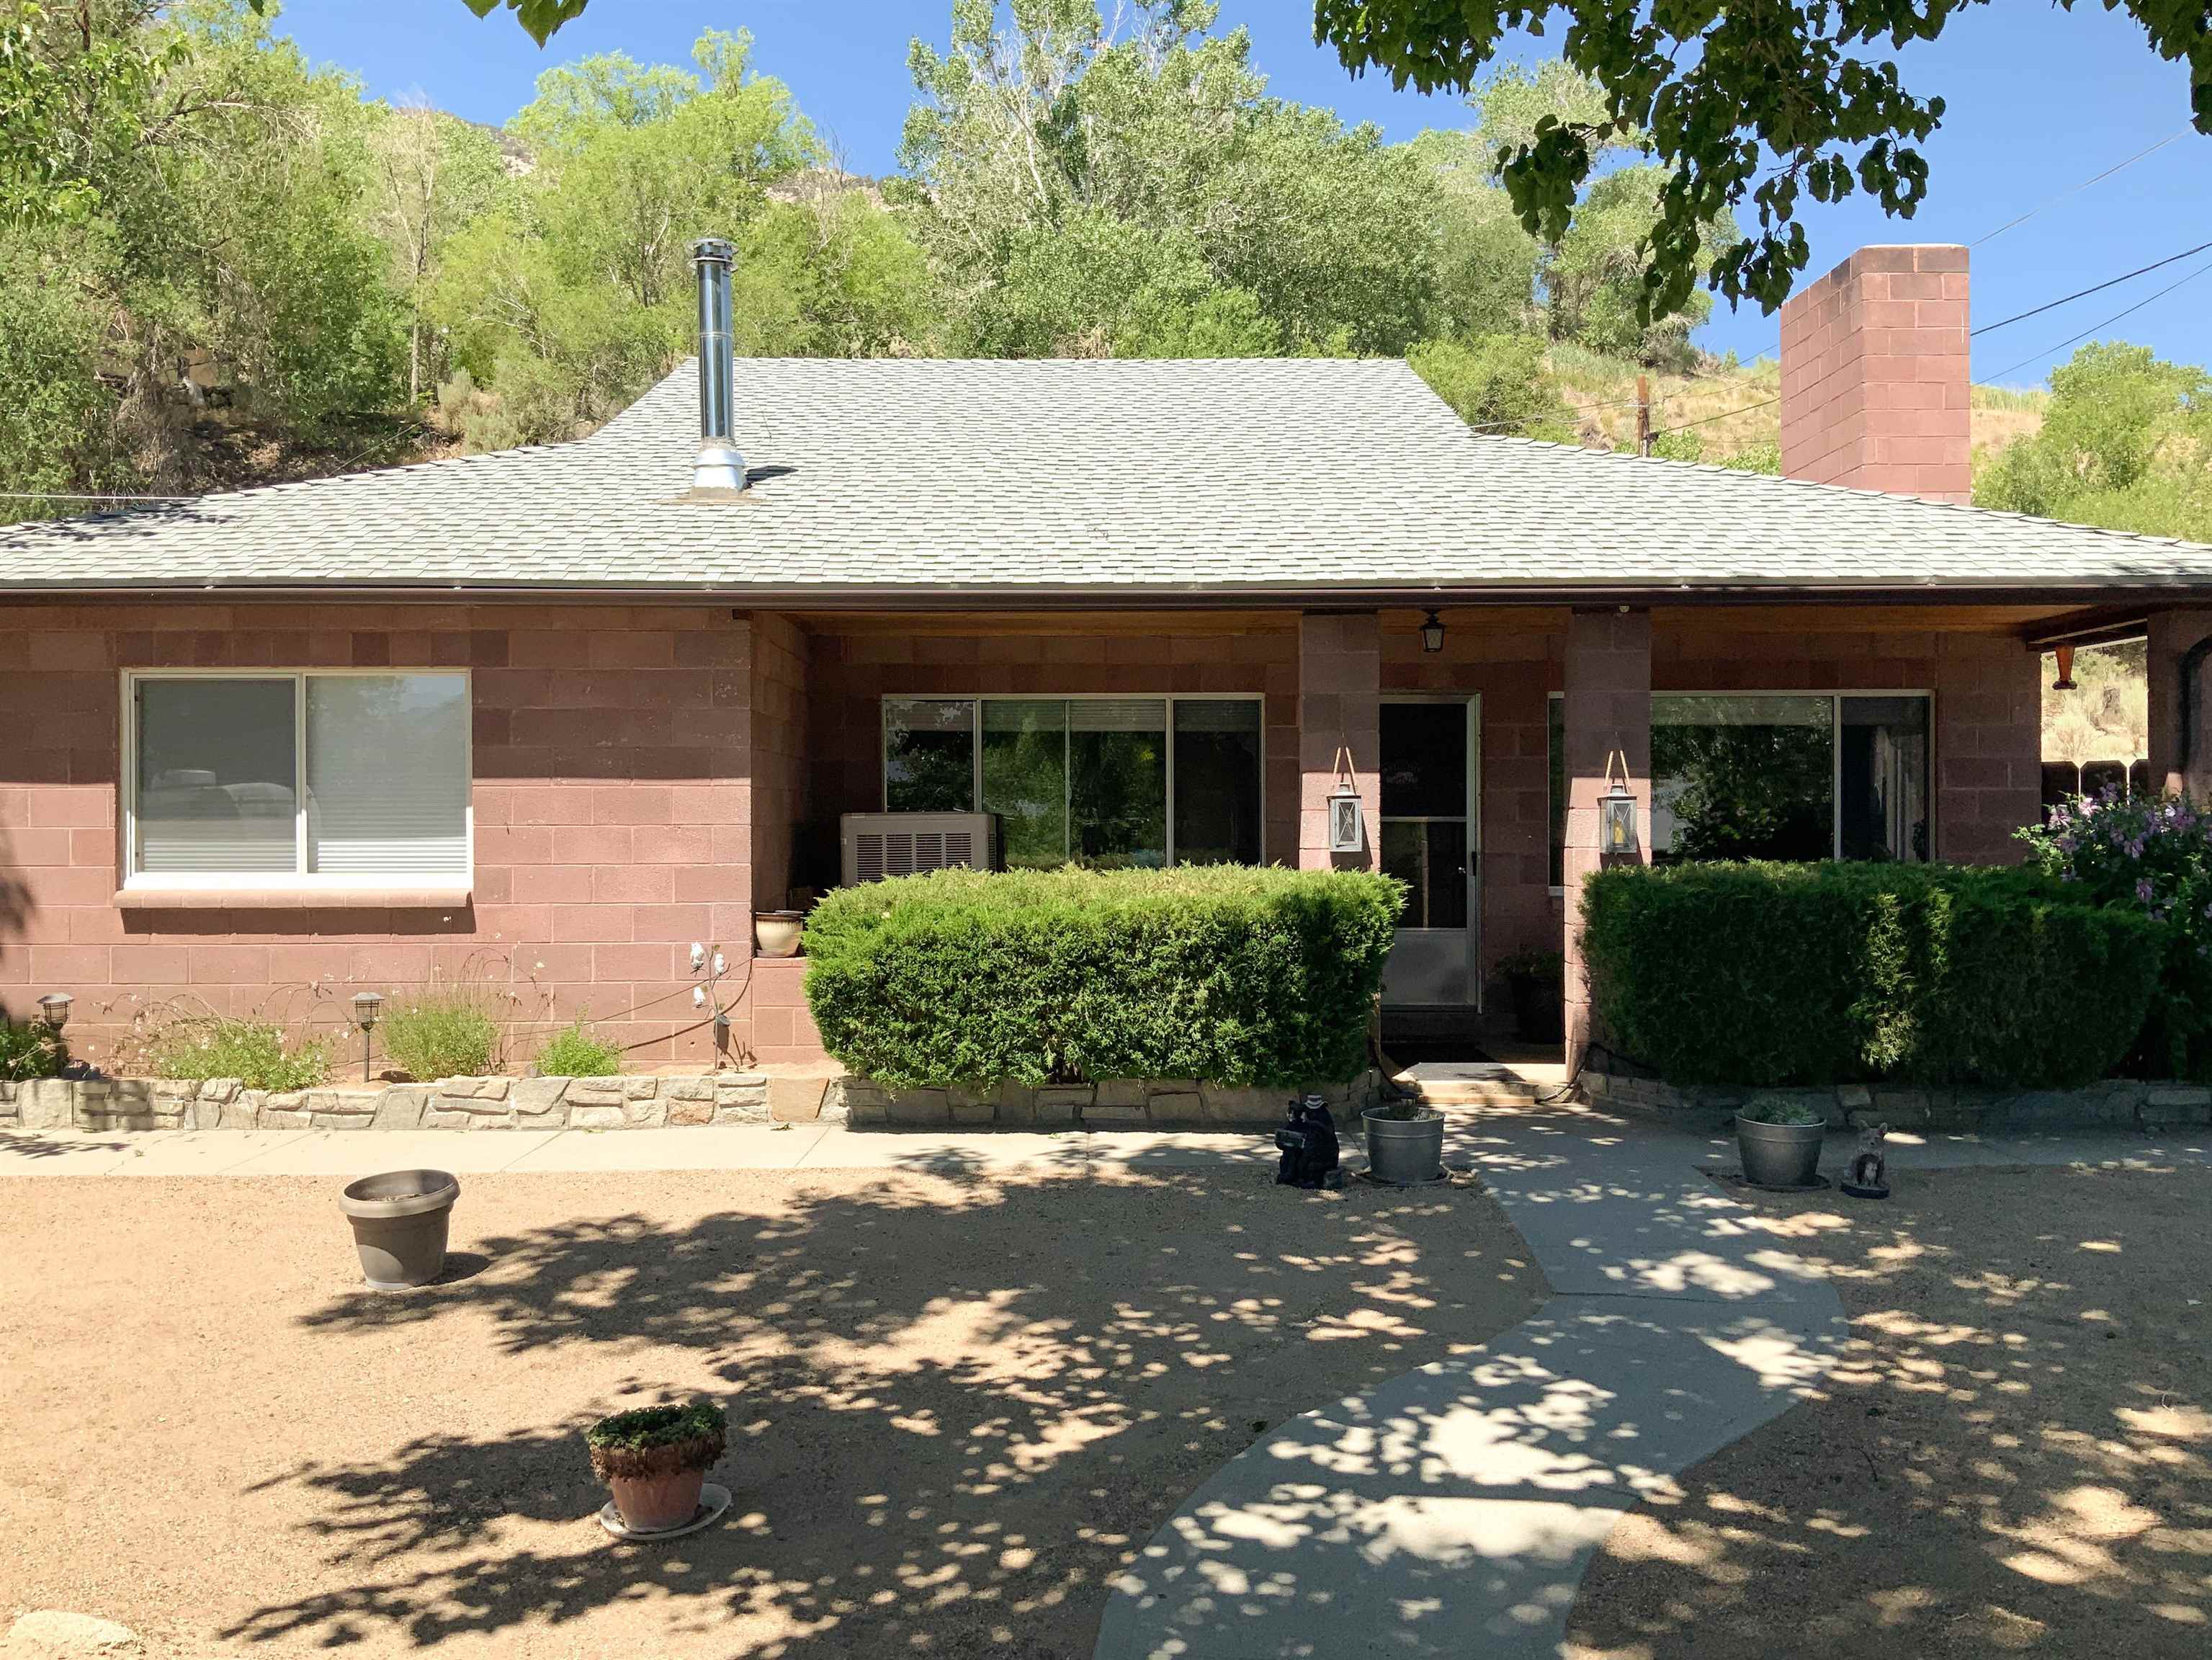 3 bedroom, 1 bath home with beautiful views. Lots of space to store your toys. Covered concrete patio and a very nice yard. Don't wait, this well cared for home will go fast!